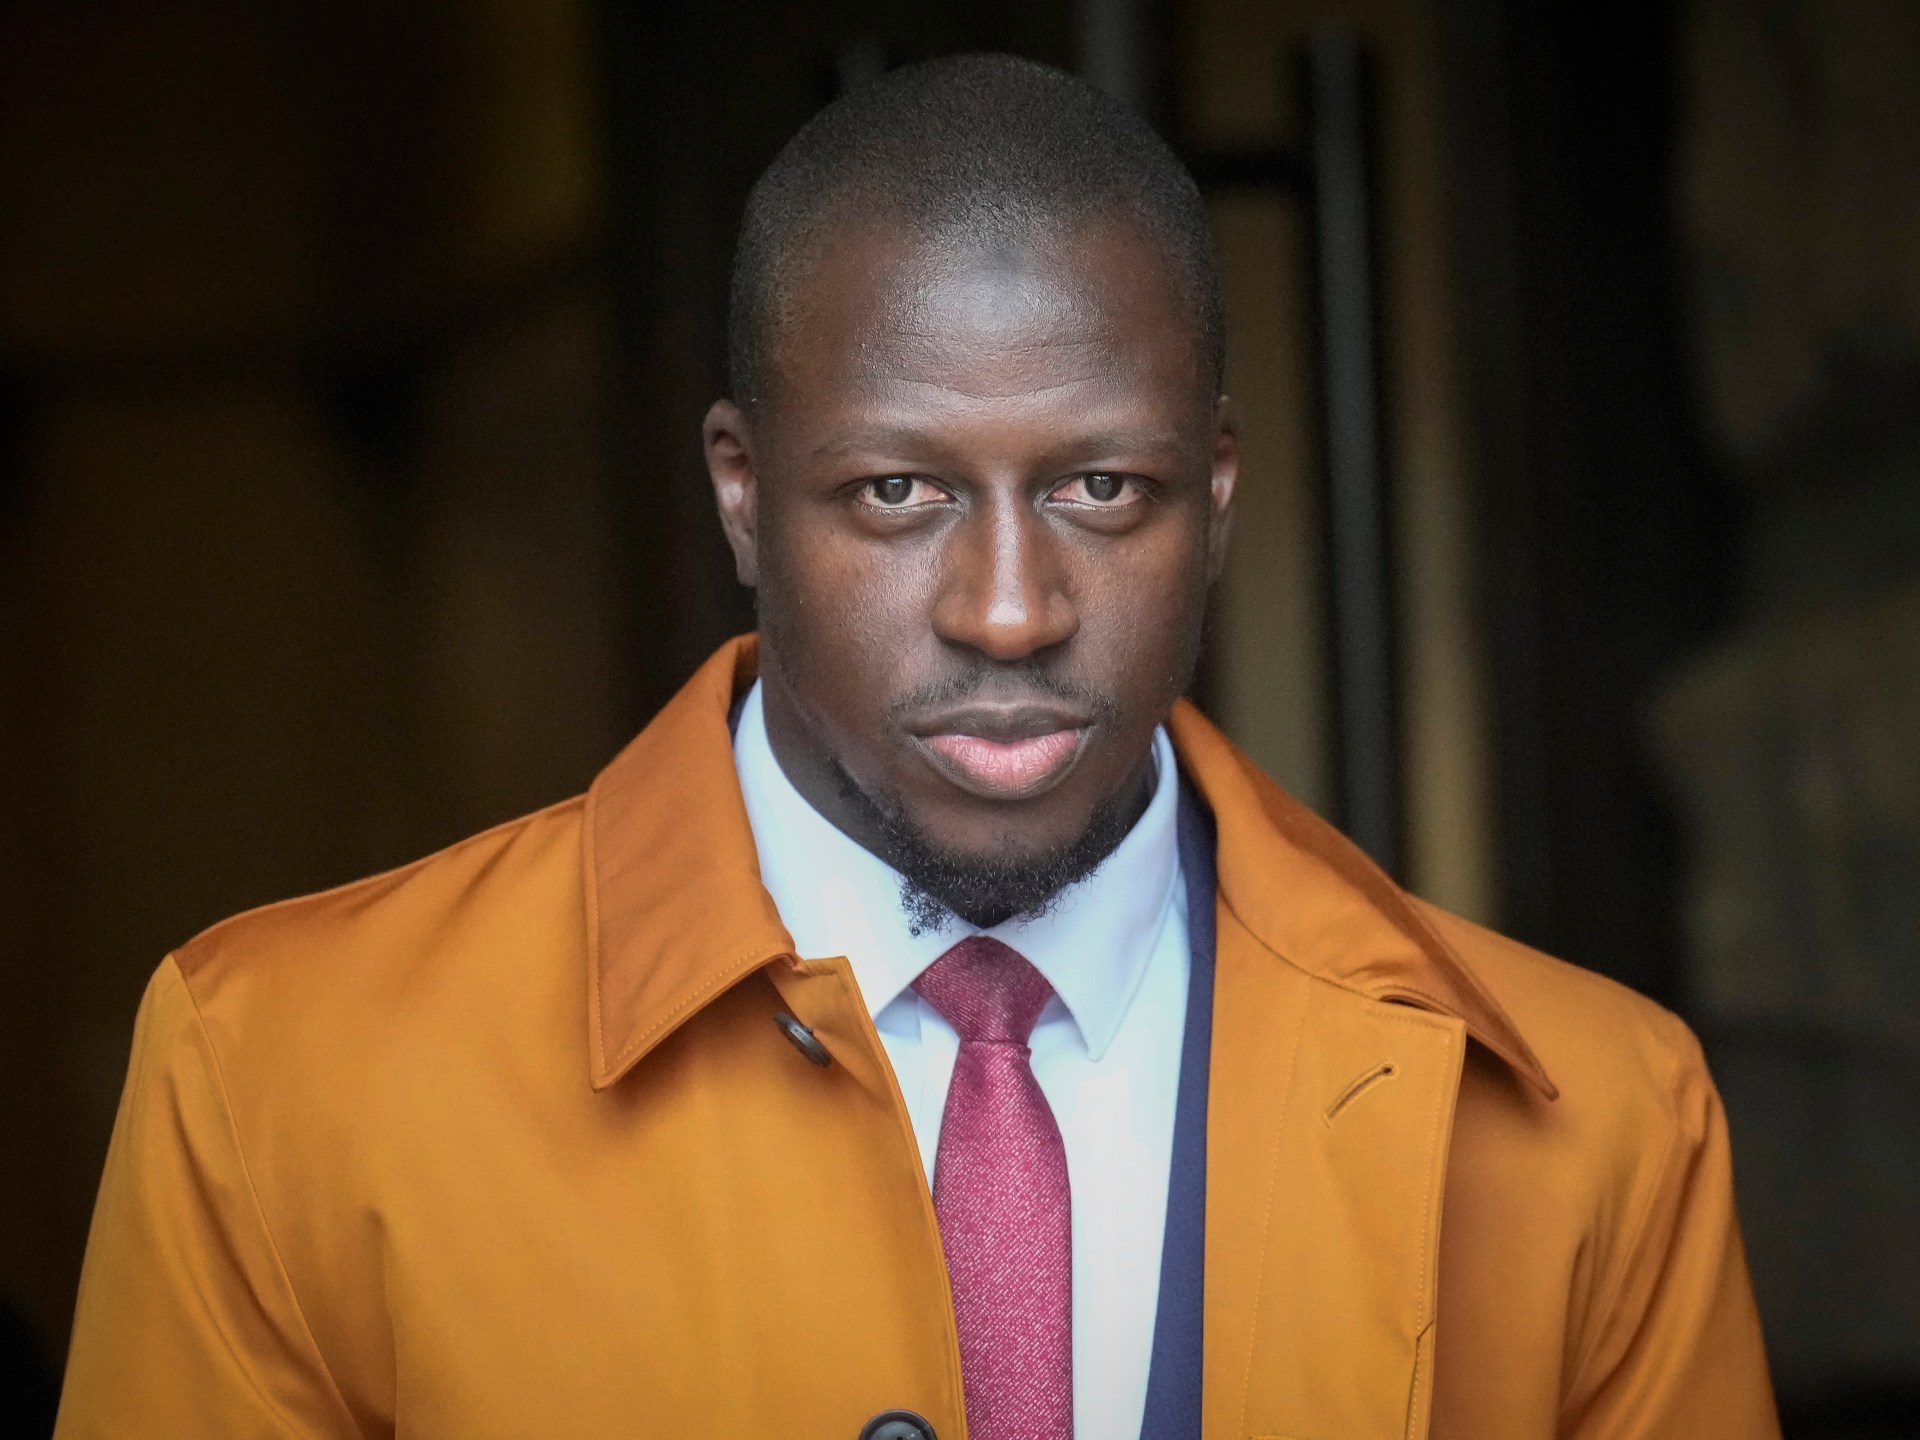 Benjamin Mendy to take former club Manchester City to employment tribunal